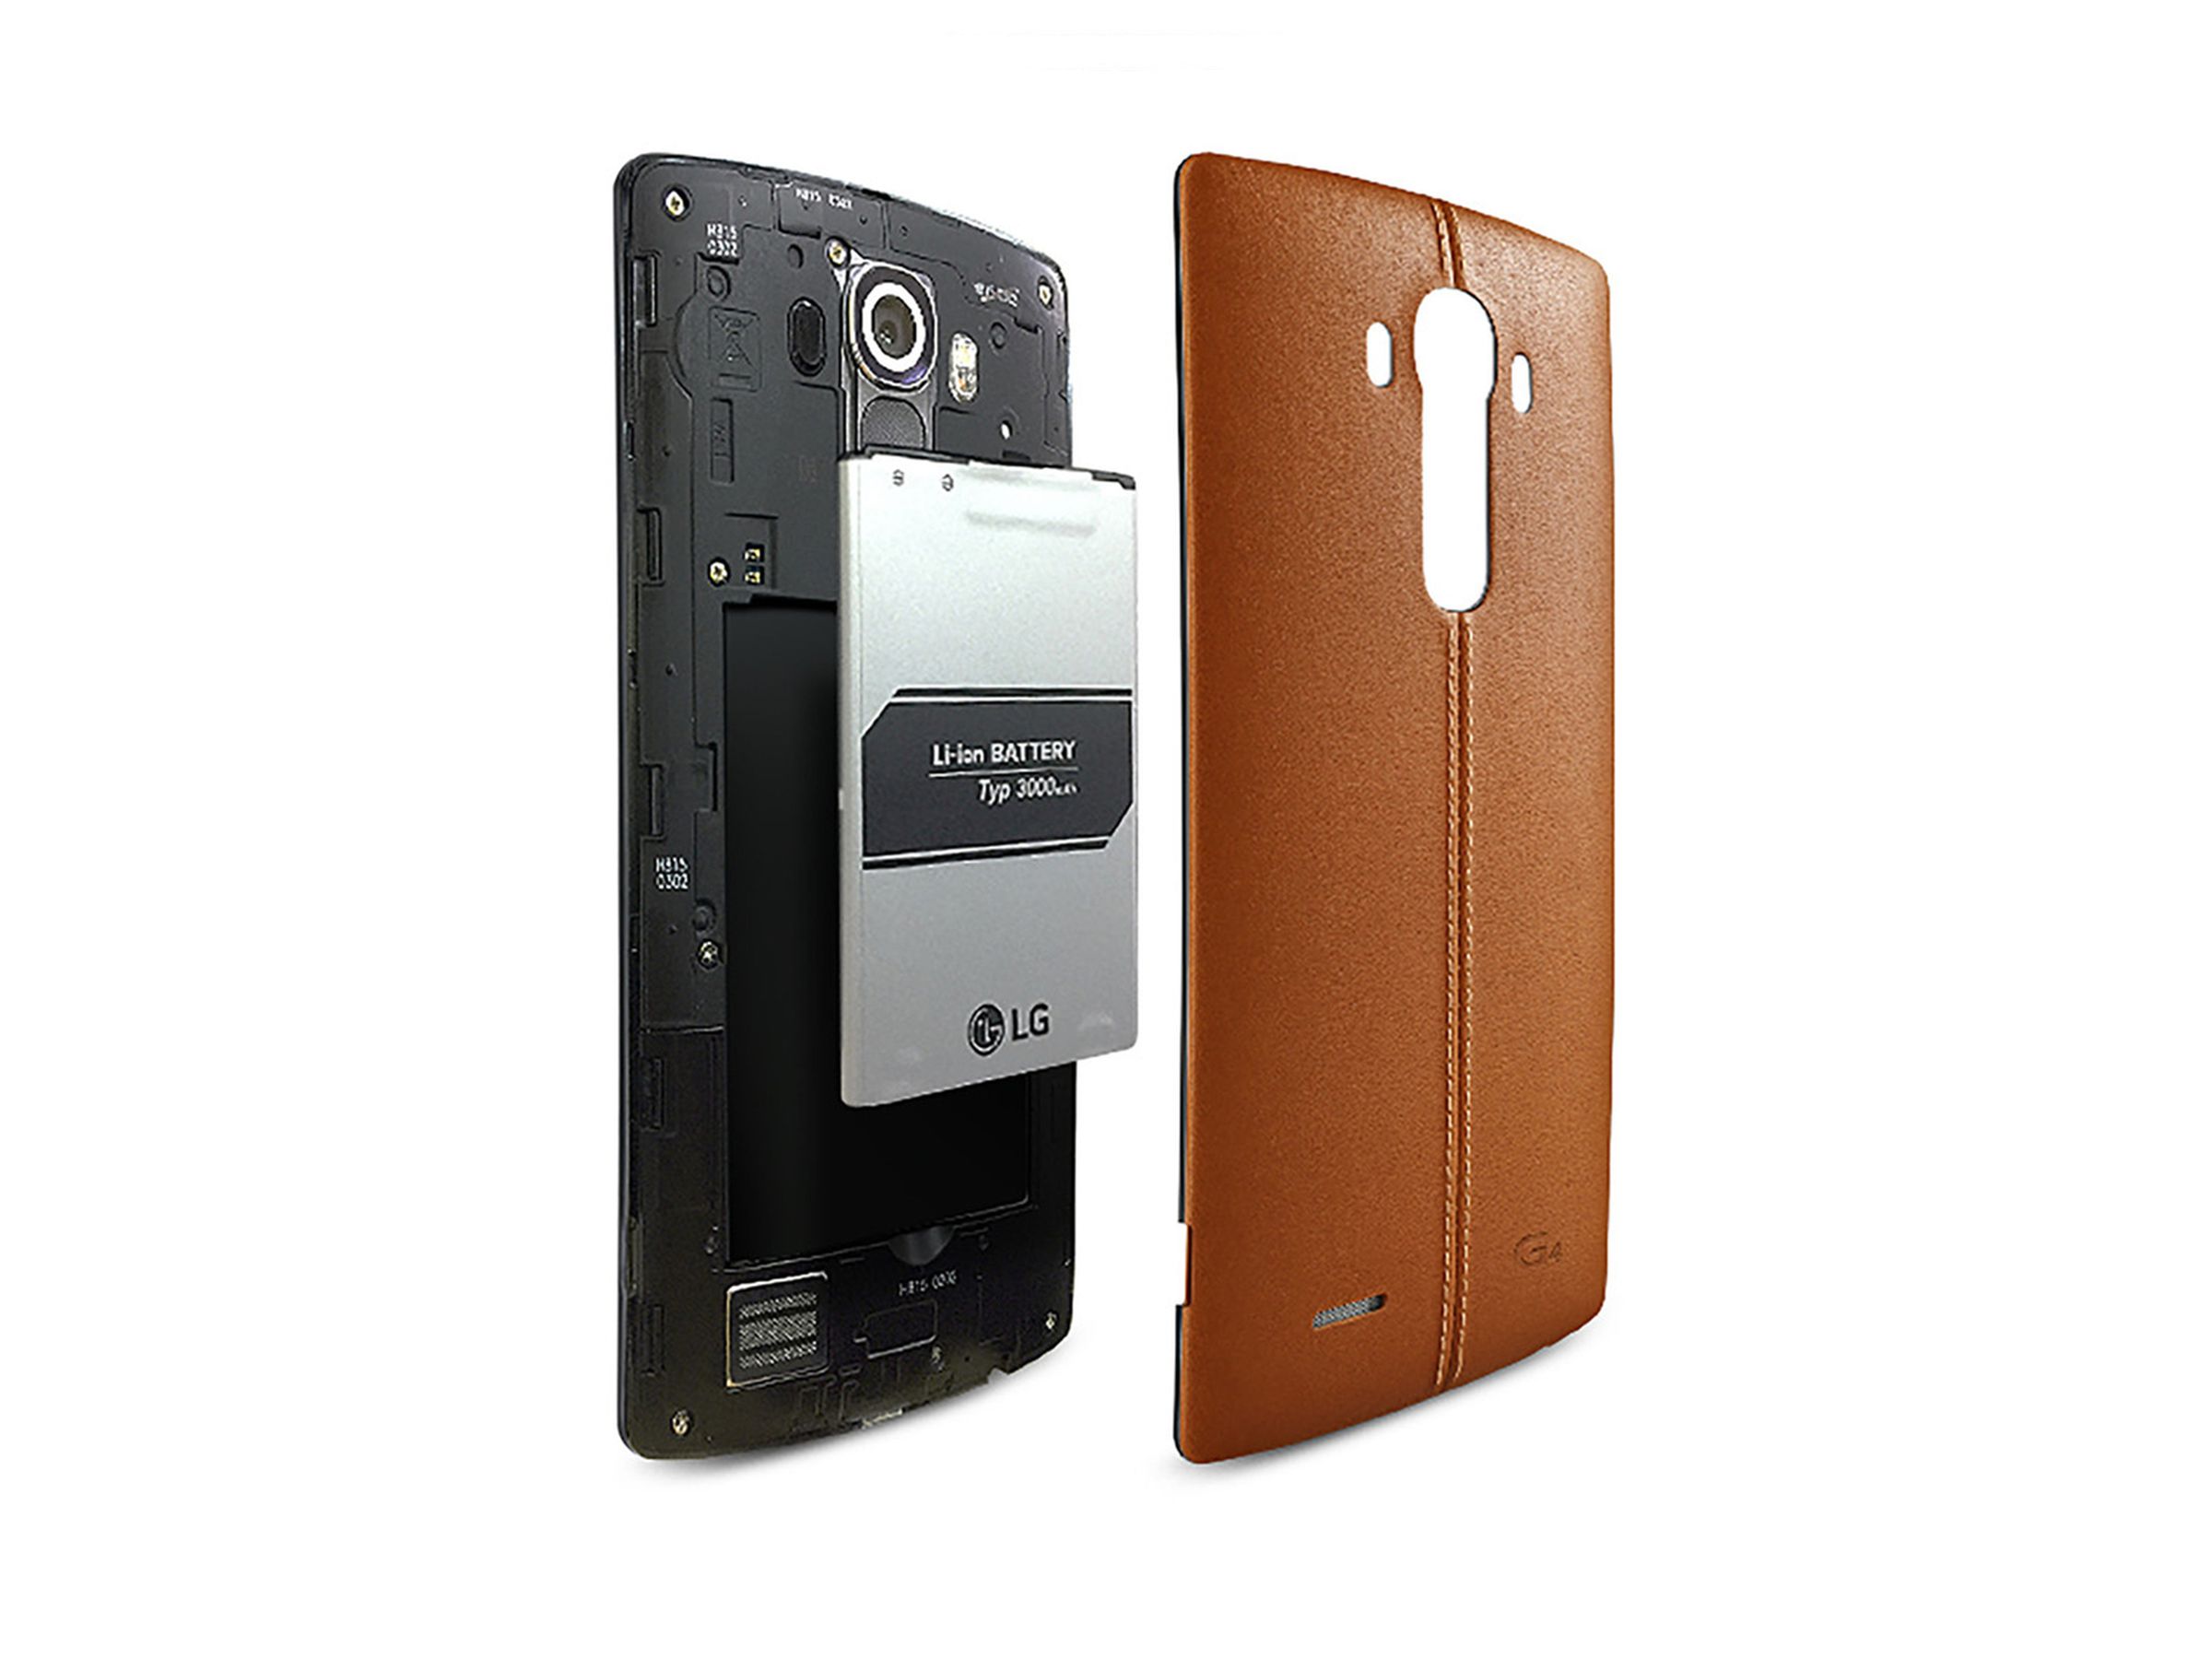 LG G4 leaked pictures